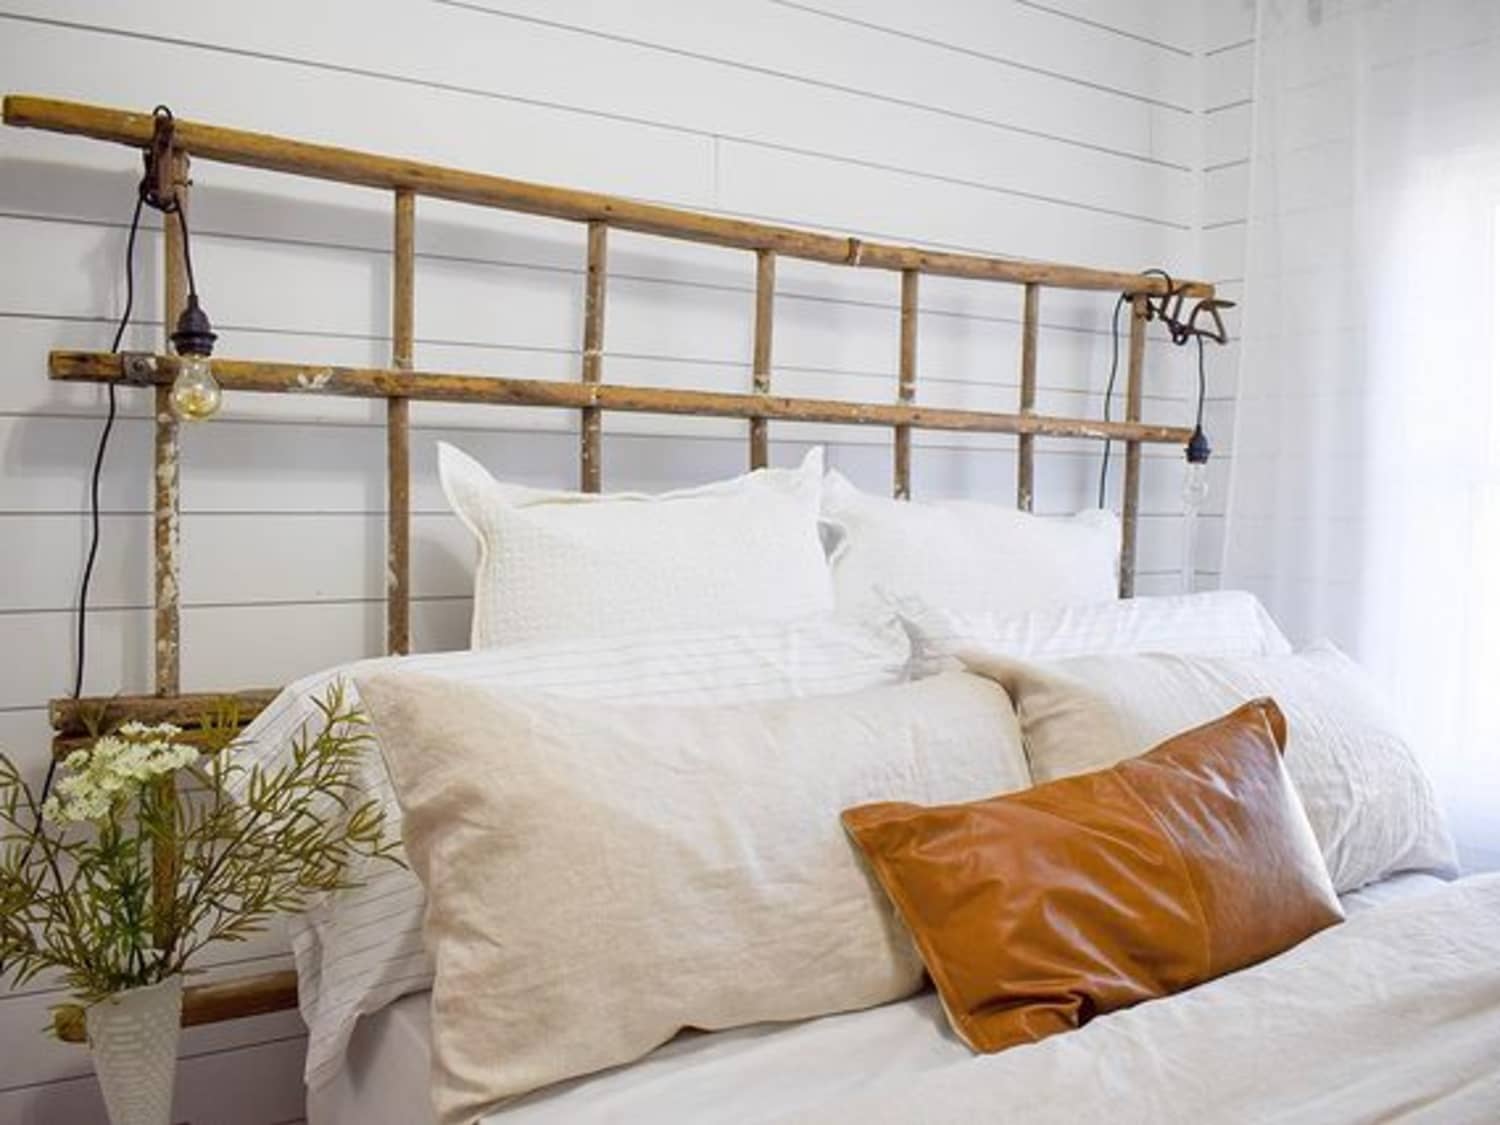 Bed Without a Headboard? 14 Headboard Alternatives to Use Instead